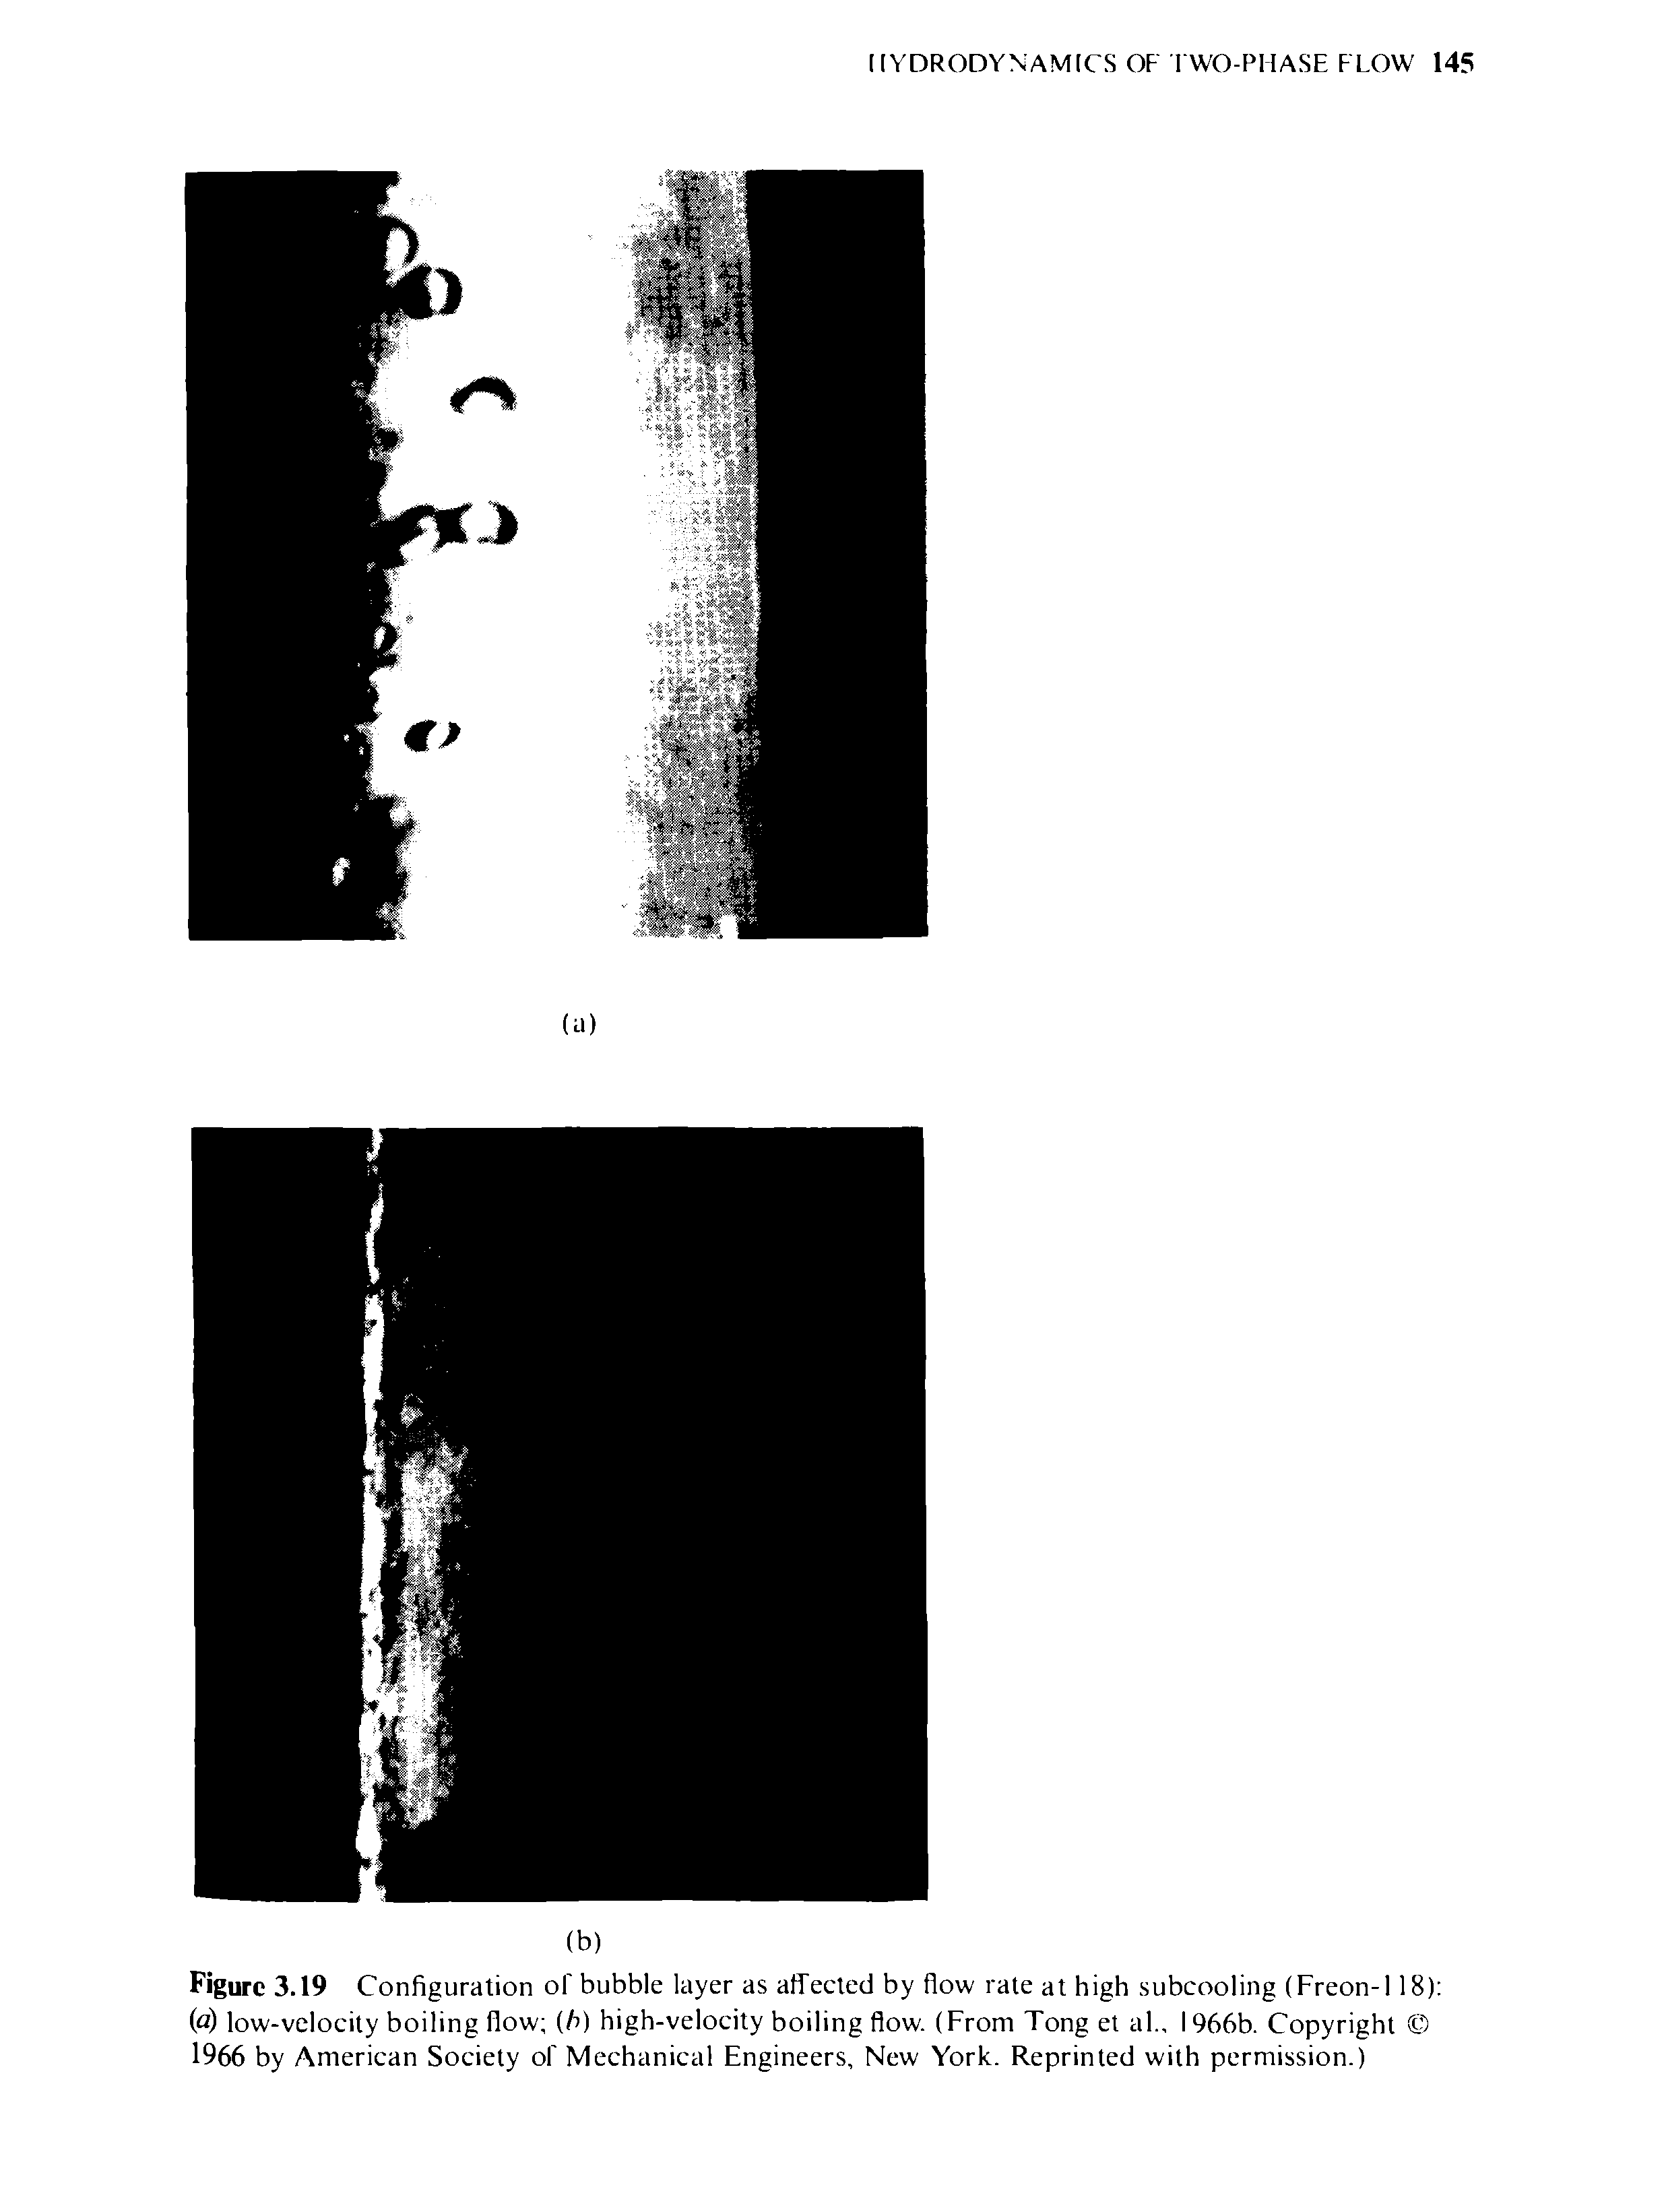 Figure 3.19 Configuration of bubble layer as affected by flow rate at high subcooling (Freon-118) (a) low-velocity boiling flow (b) high-velocity boiling flow. (From Tong et al., 1966b. Copyright 5 1966 by American Society of Mechanical Engineers, New York. Reprinted with permission.)...